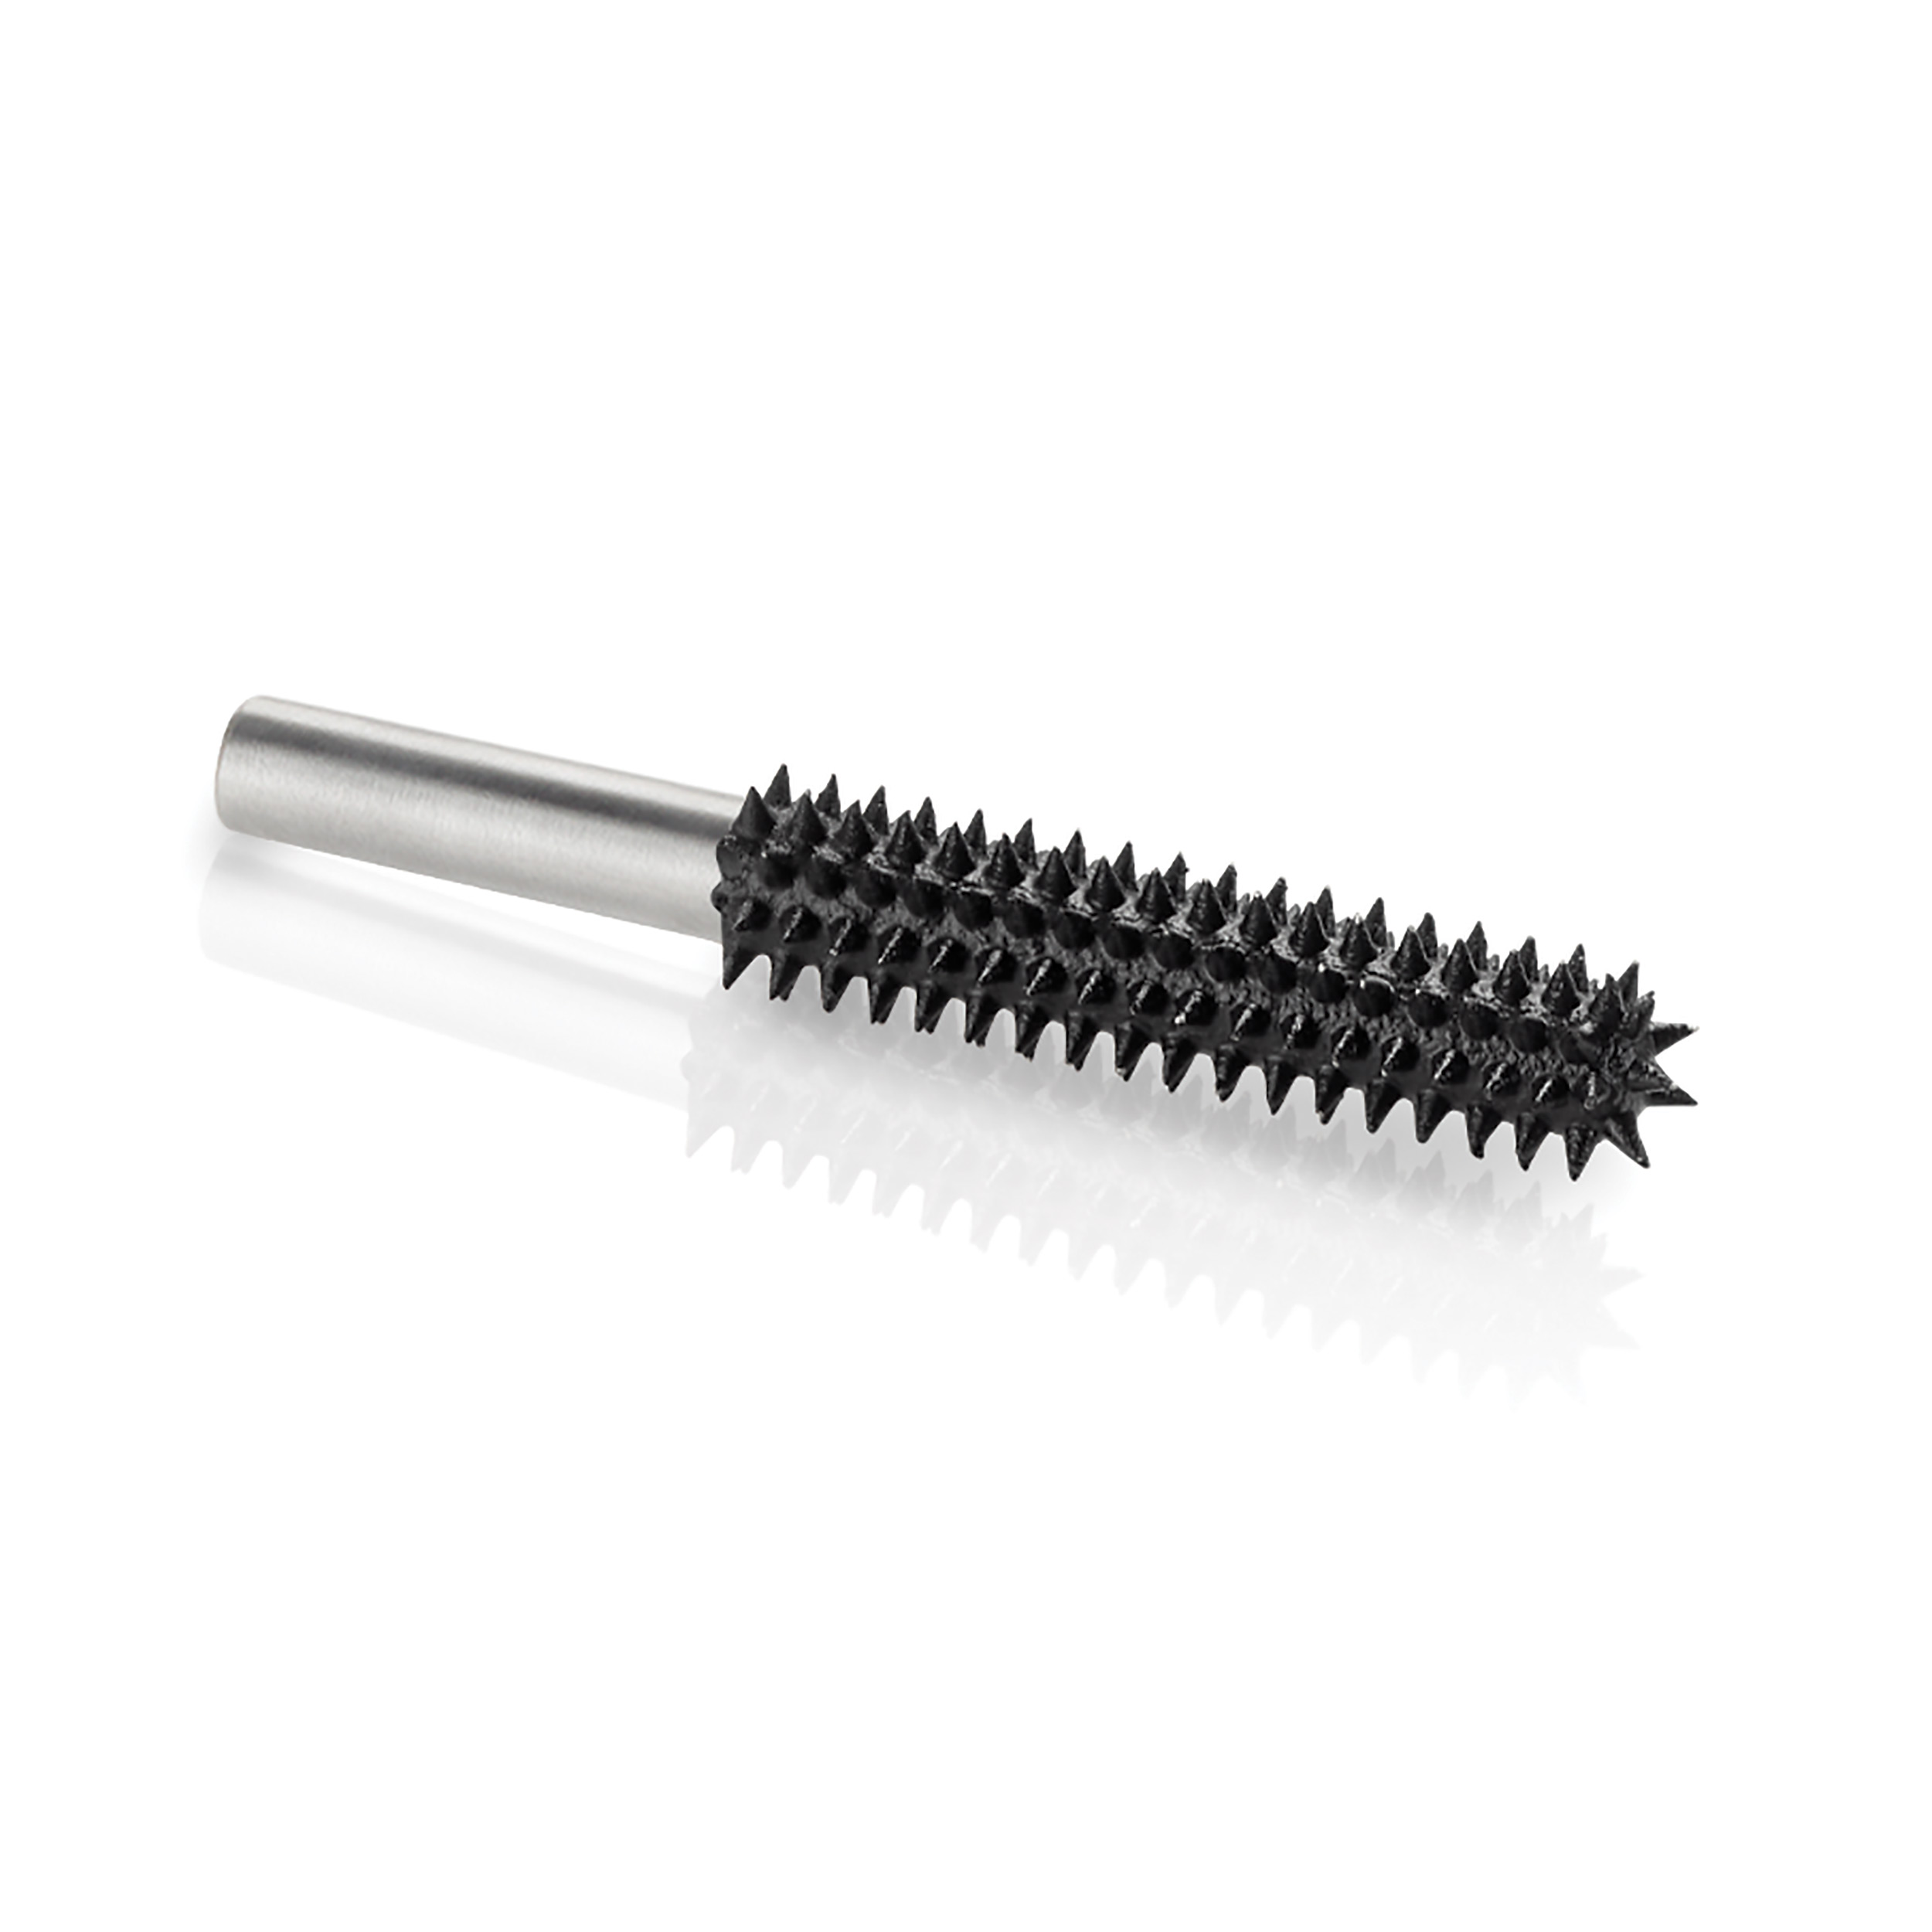 Extreme Ball Nose Burr, 1/4" Shaft, Very Coarse (1/4" X 1-1/2")